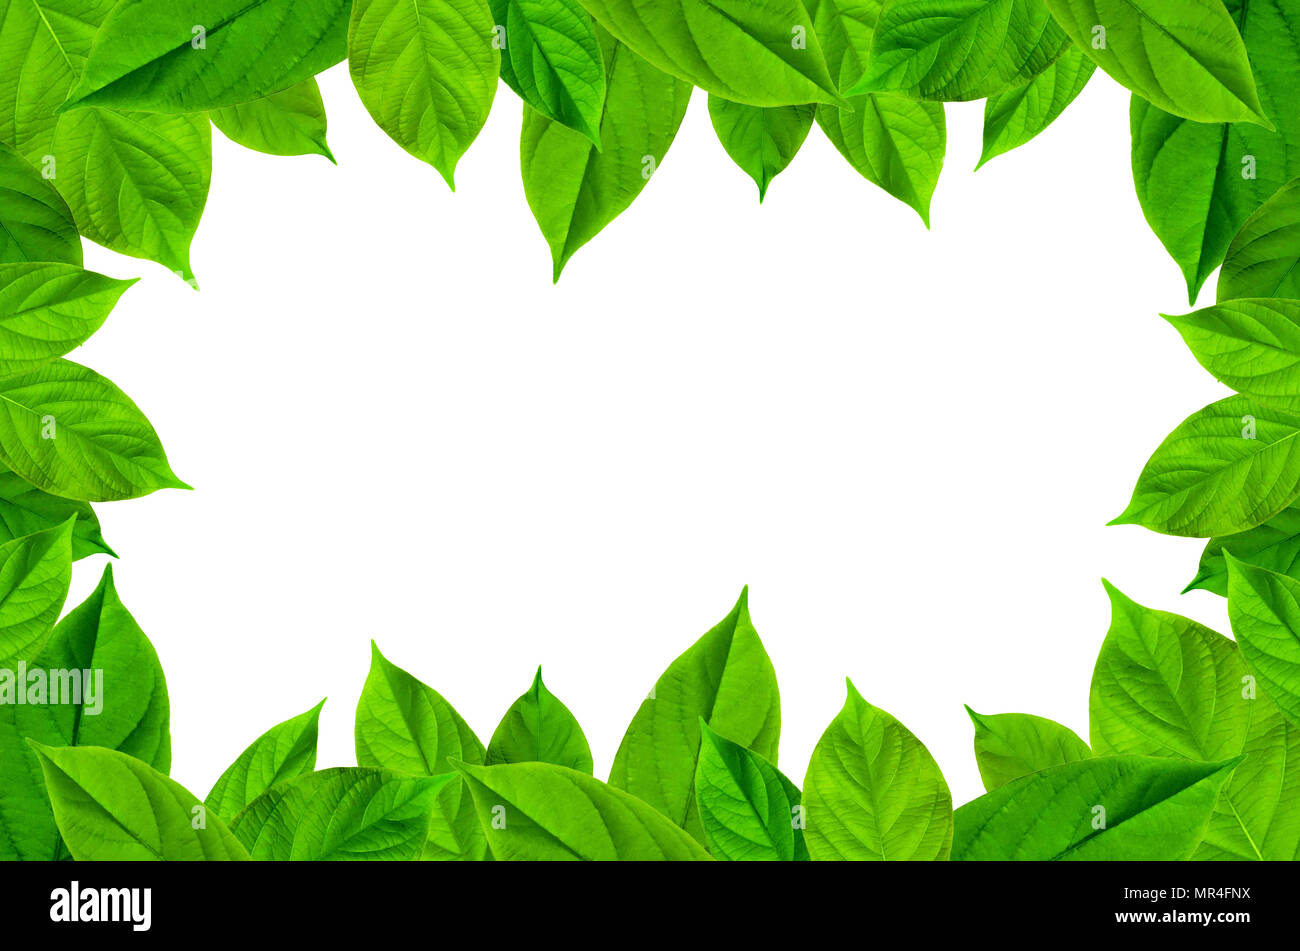 Frame from green leaves on white background for isolated, Frame by green leaf and fern leaf, Free space by green leaves on white background for cut of Stock Photo